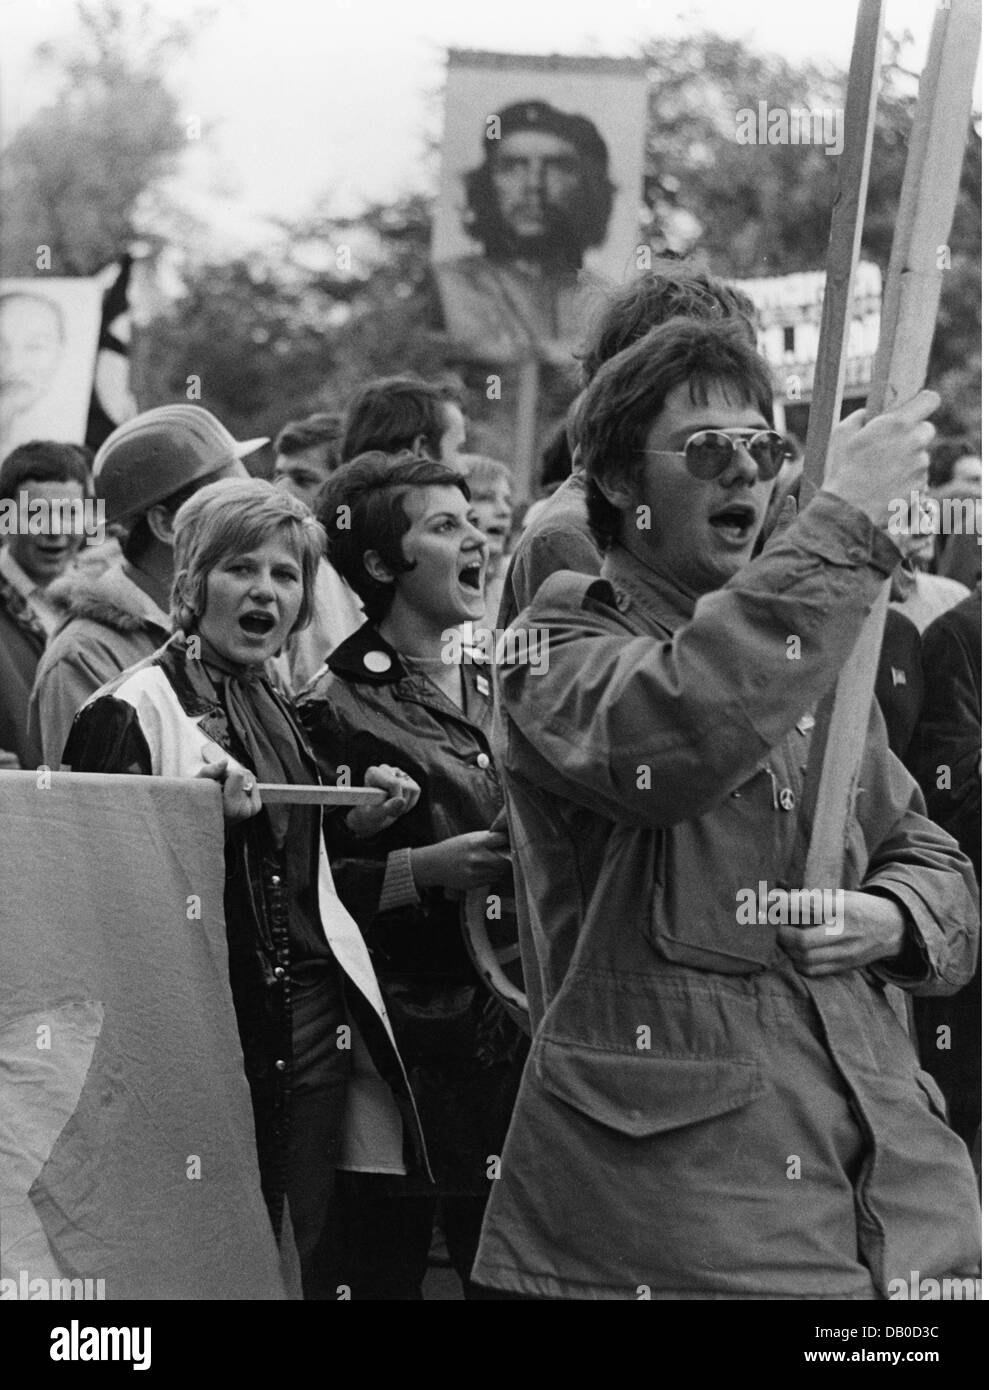 politics, demonstrations, Germany, demonstration, Munich, 1968 / 1969, Additional-Rights-Clearences-Not Available Stock Photo